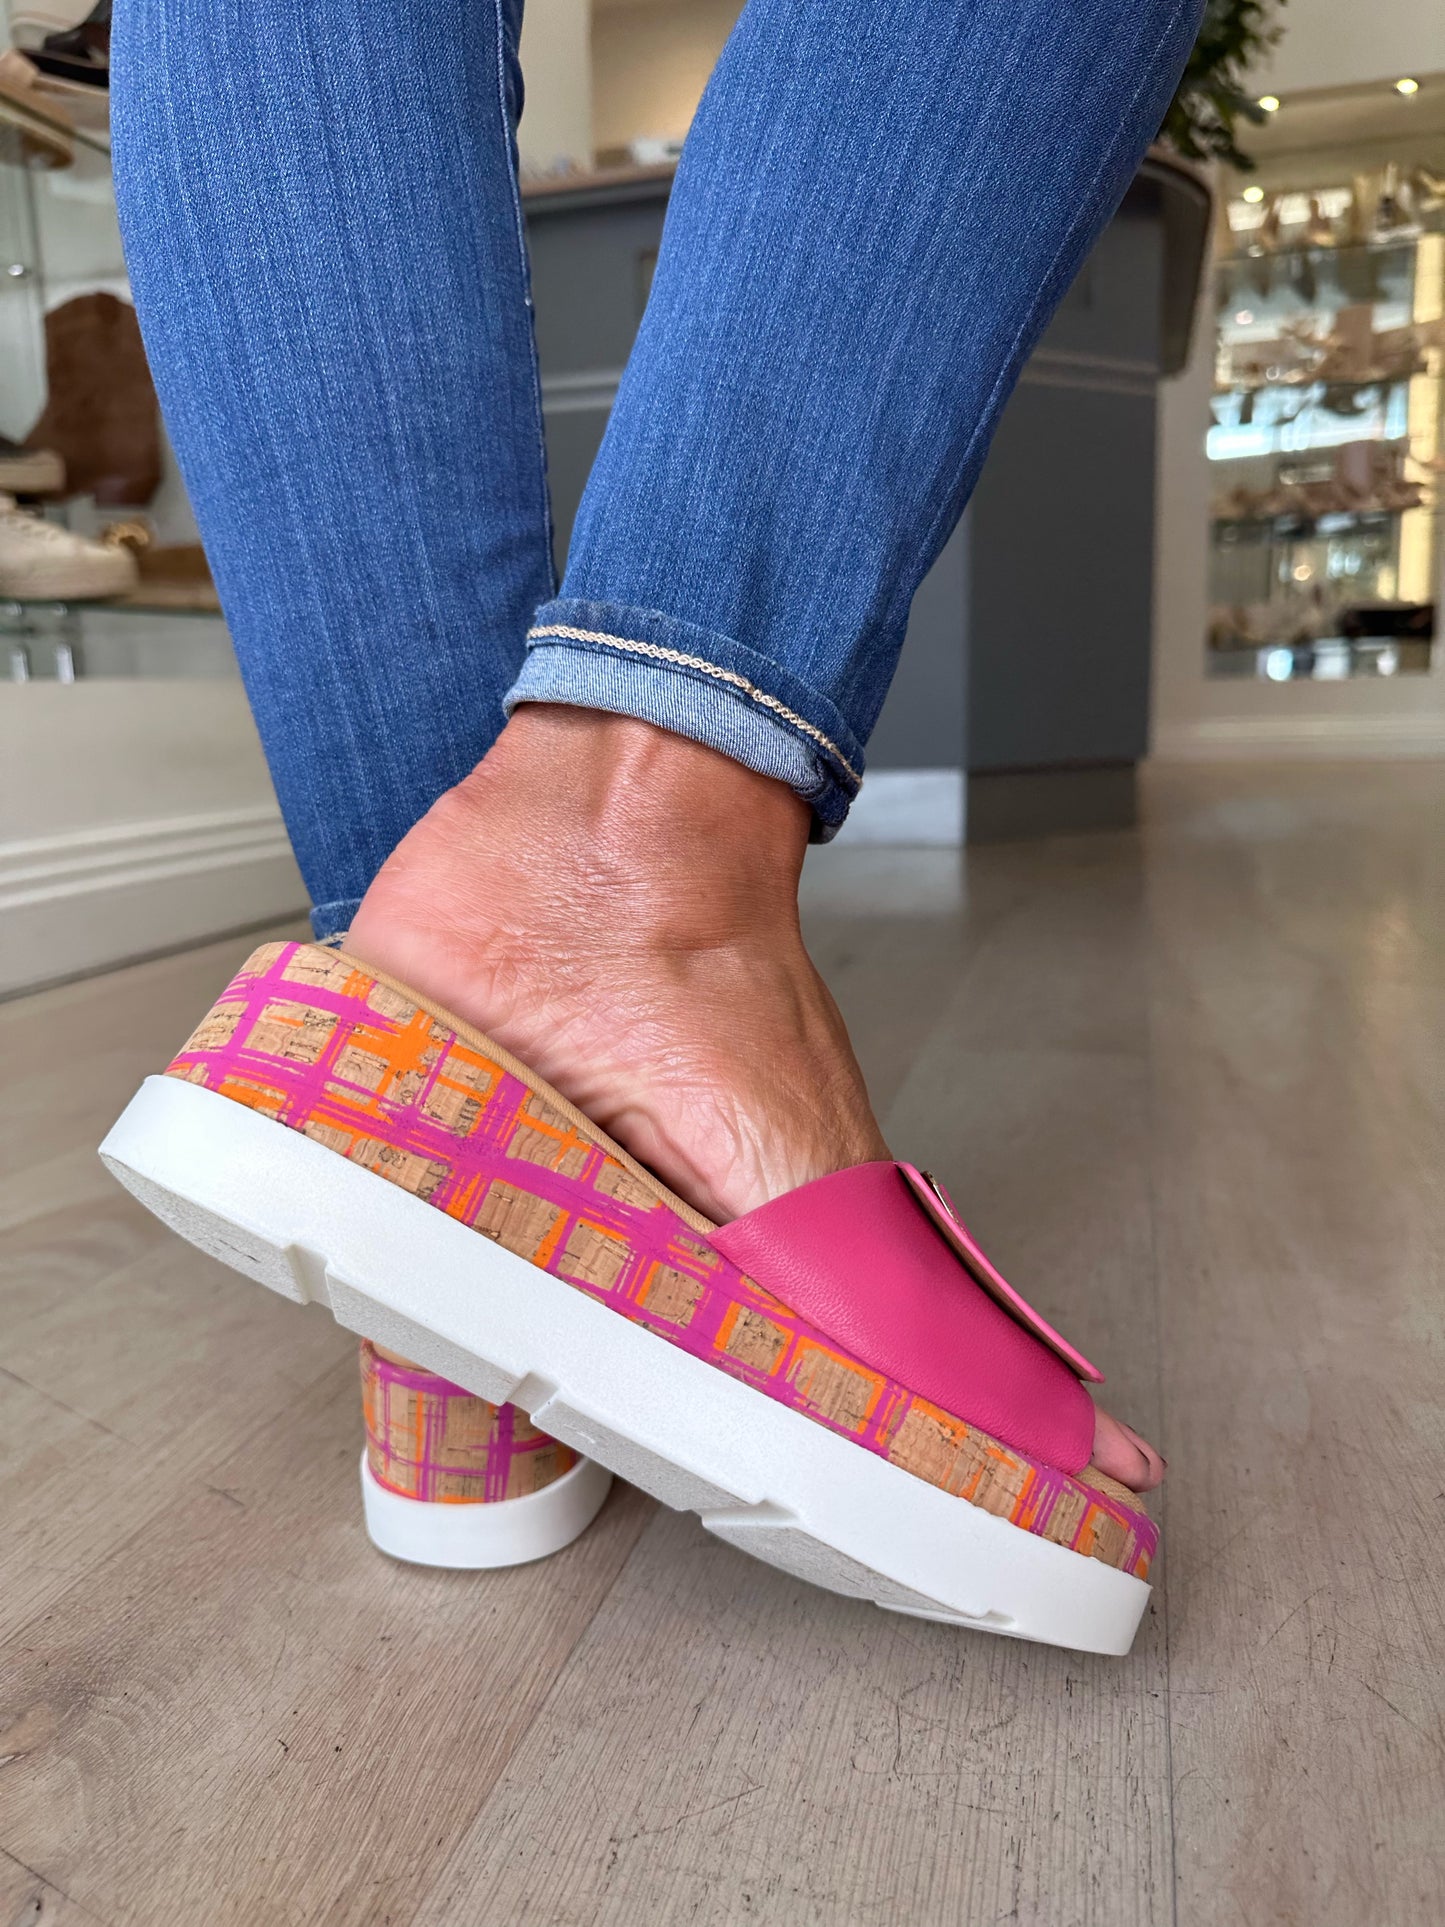 Repo -Pink Leather Slider With Patterned Wedge Sole